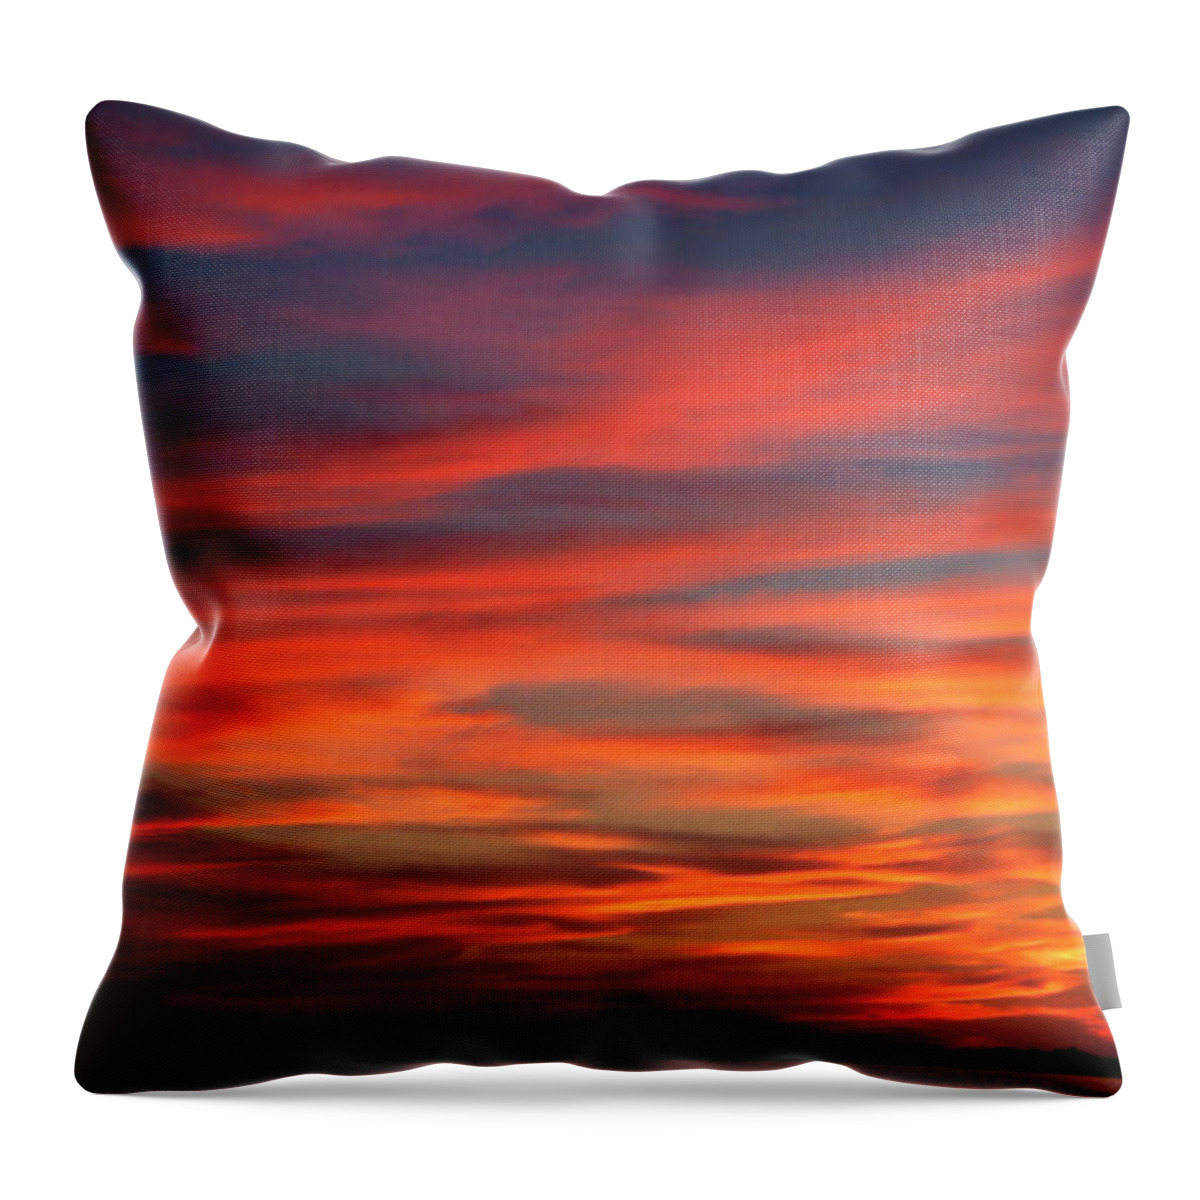 Sunset Over Water Throw Pillow featuring the photograph Sunset Sky by Sally Weigand